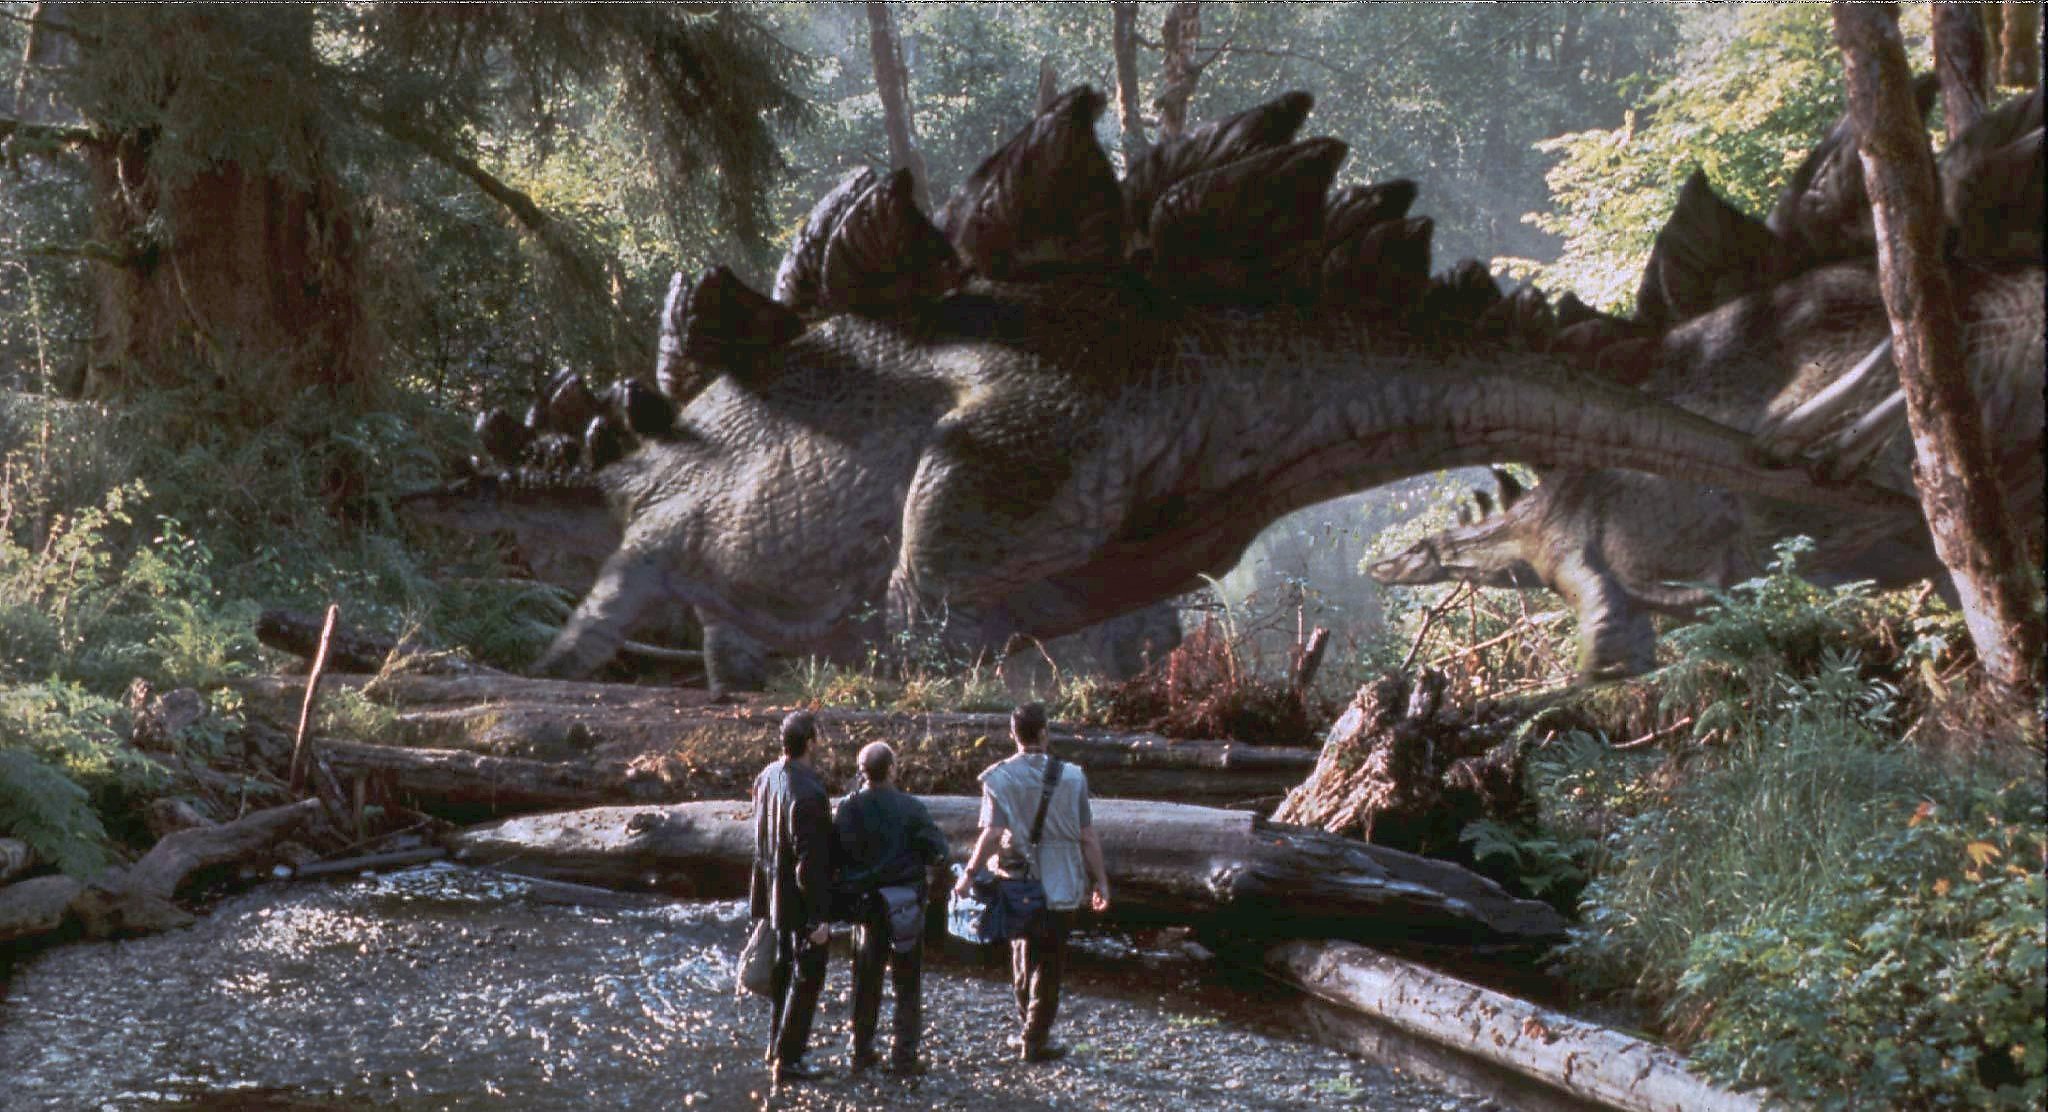 How the 'Jurassic Park' sequel almost ruined one of California’s most ...